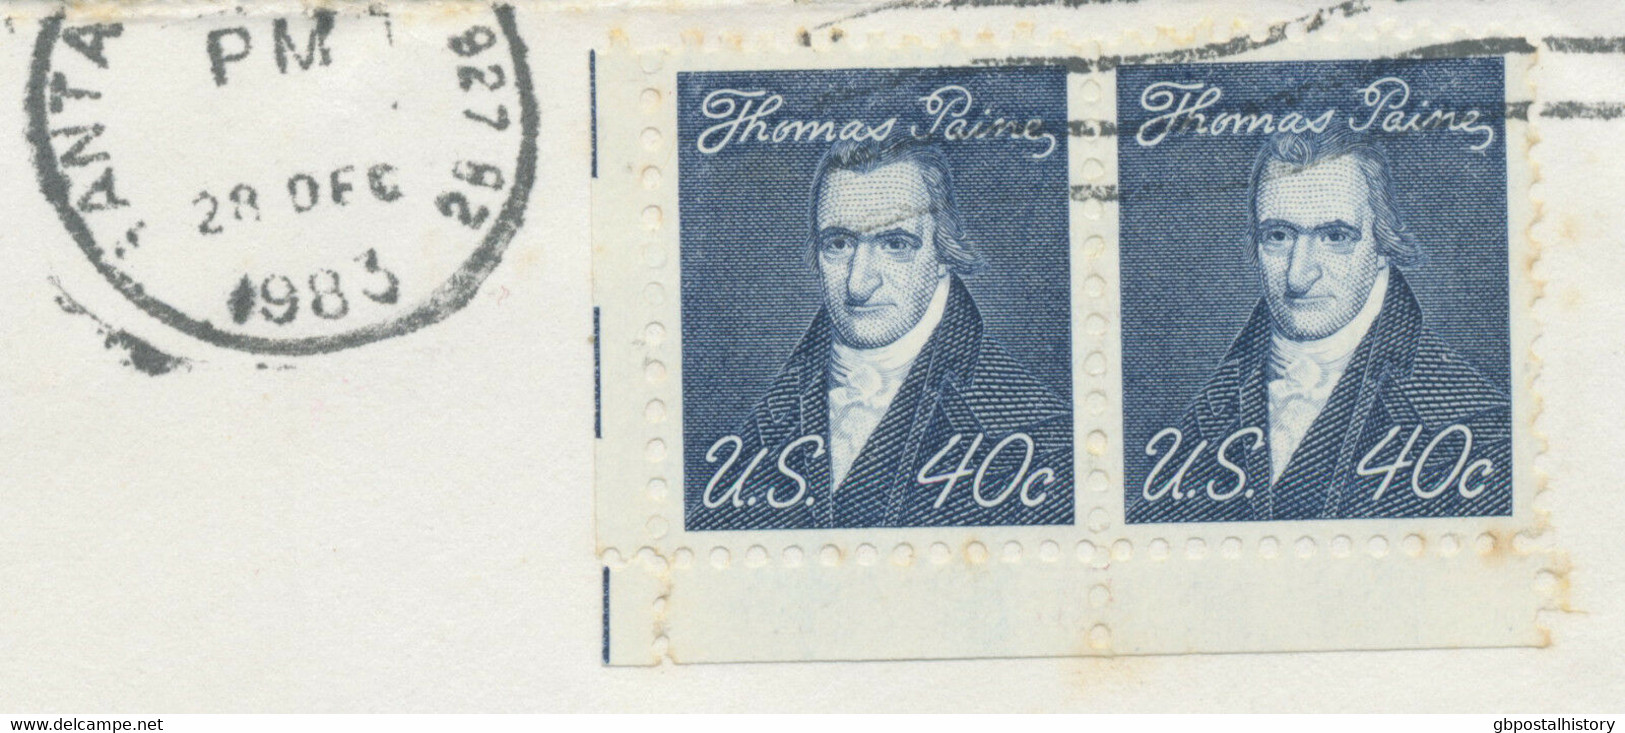 USA 1983, Thomas Paine 40 C Multiple Postage On Superb Air Mail Cover To Germany - Storia Postale